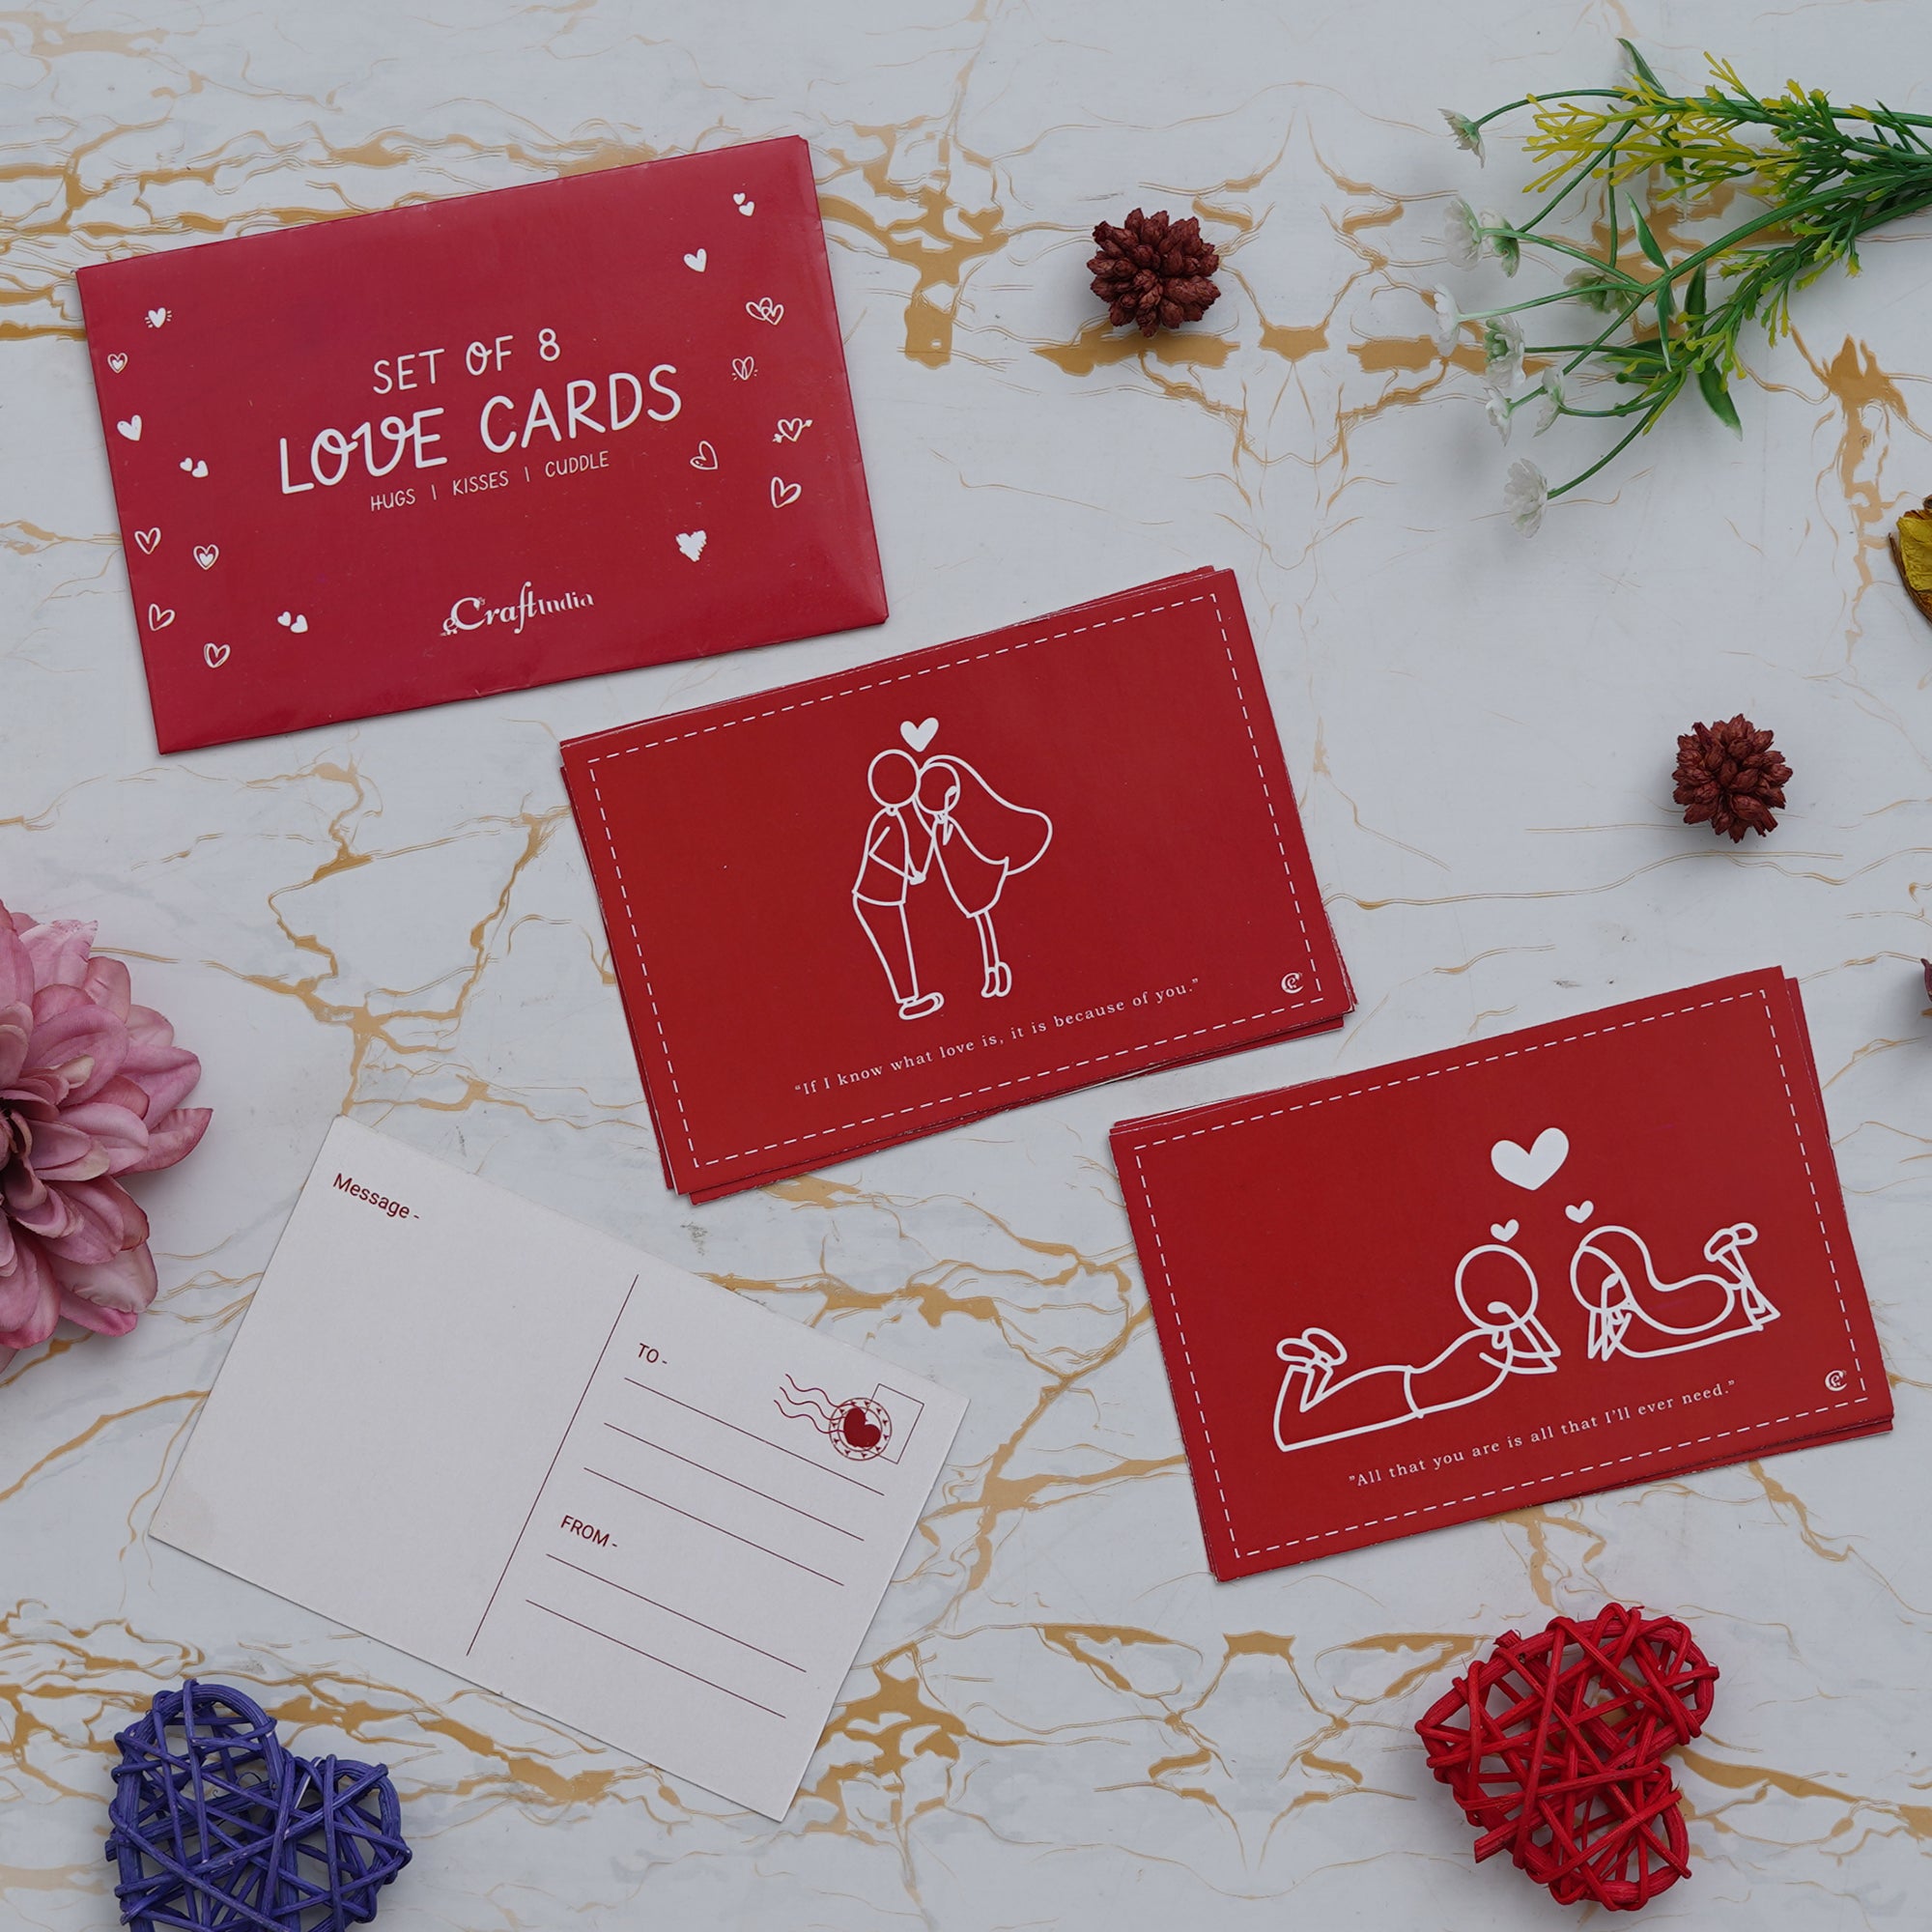 Valentine Combo of Pack of 8 Love Gift Cards, "20 Reasons Why I Love You" Printed on Little Red Hearts Decorative Wooden Gift Set Box, Red Roses Bouquet and White, Red Teddy Bear Valentine's Rectangle Shaped Gift Box 1